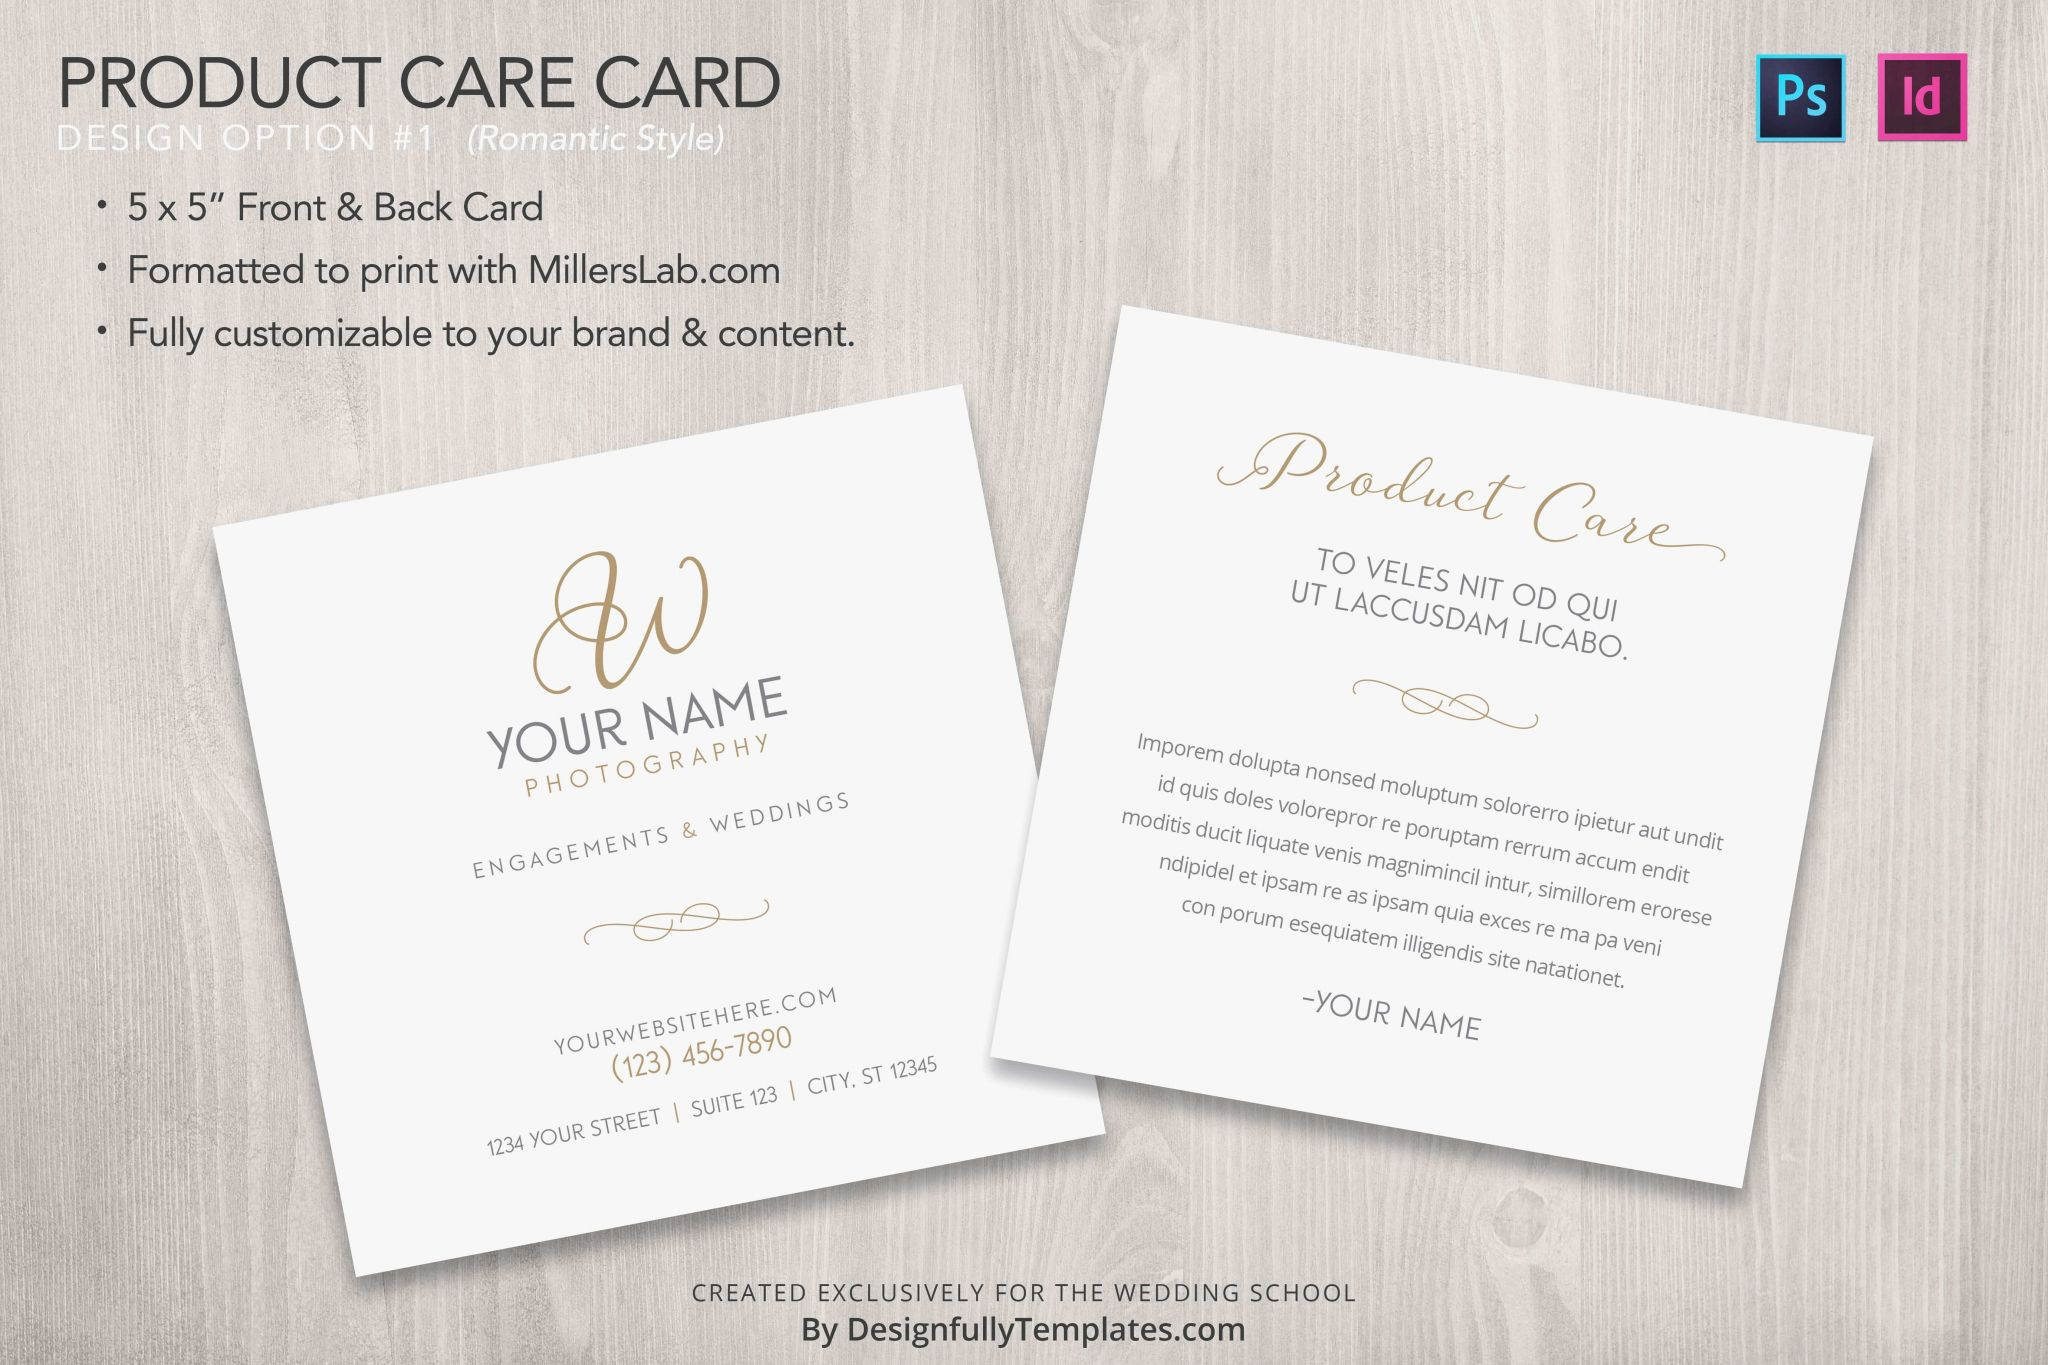 Free Place Card Templates 6 Per Page – Atlantaauctionco With Place Card Template 6 Per Sheet